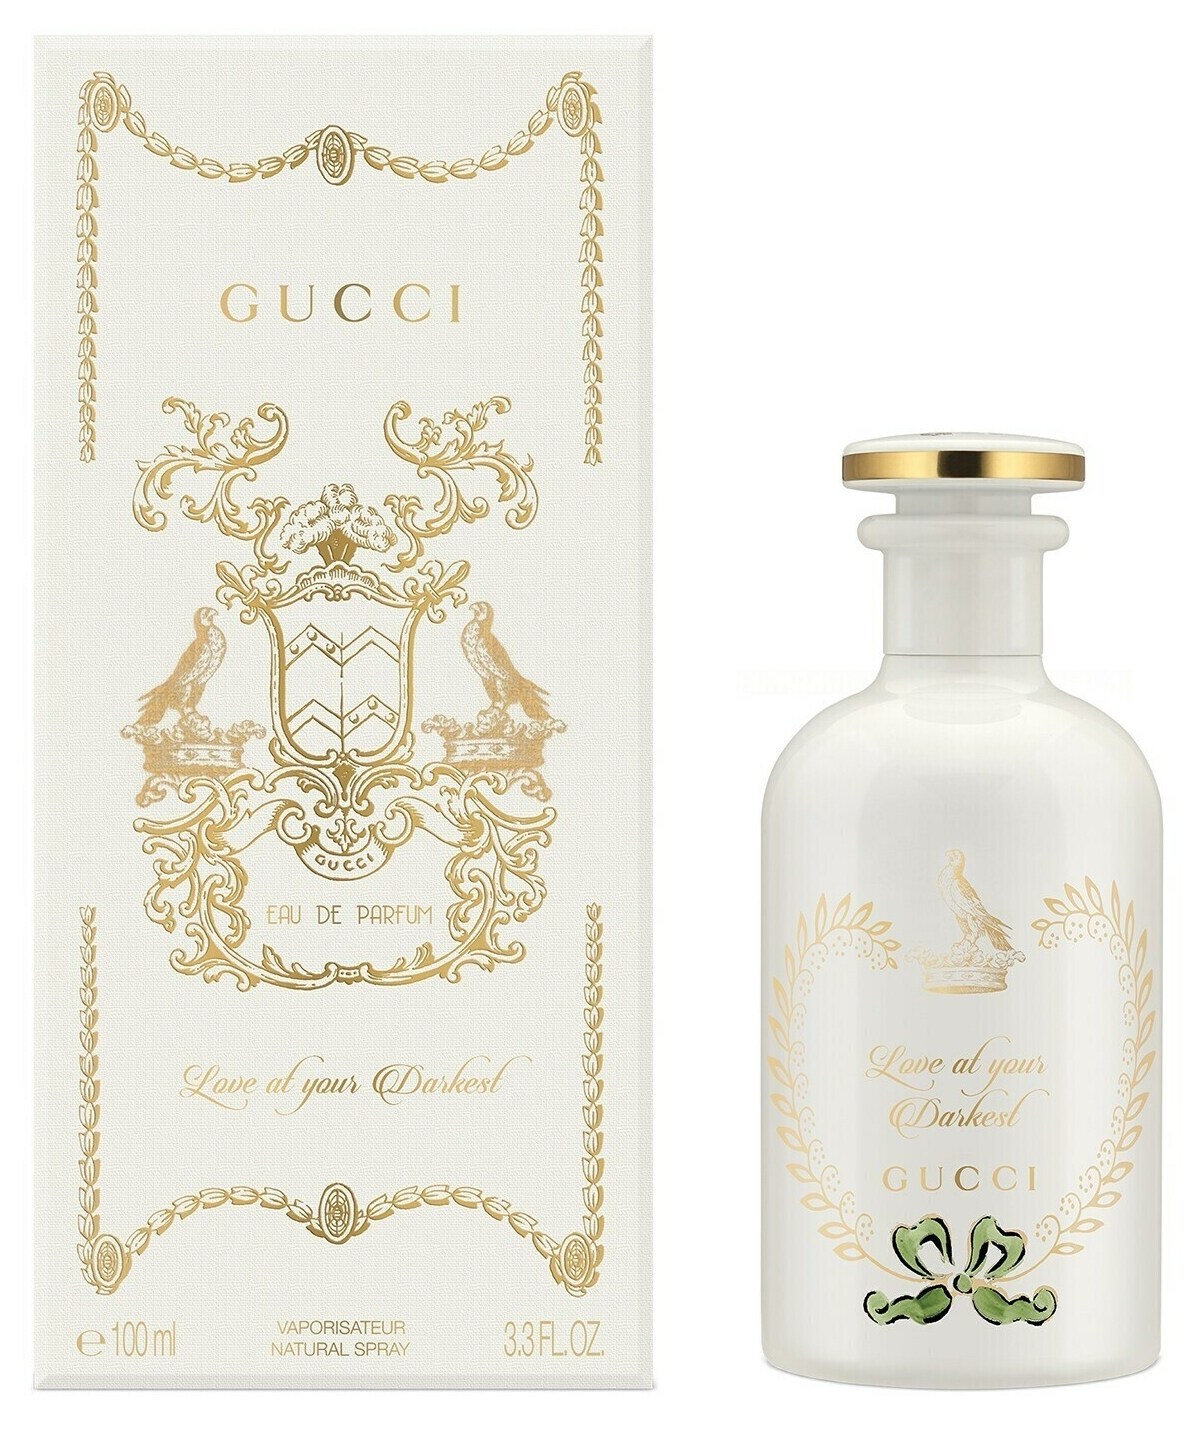 Love at your Darkest by Gucci » Reviews & Perfume Facts